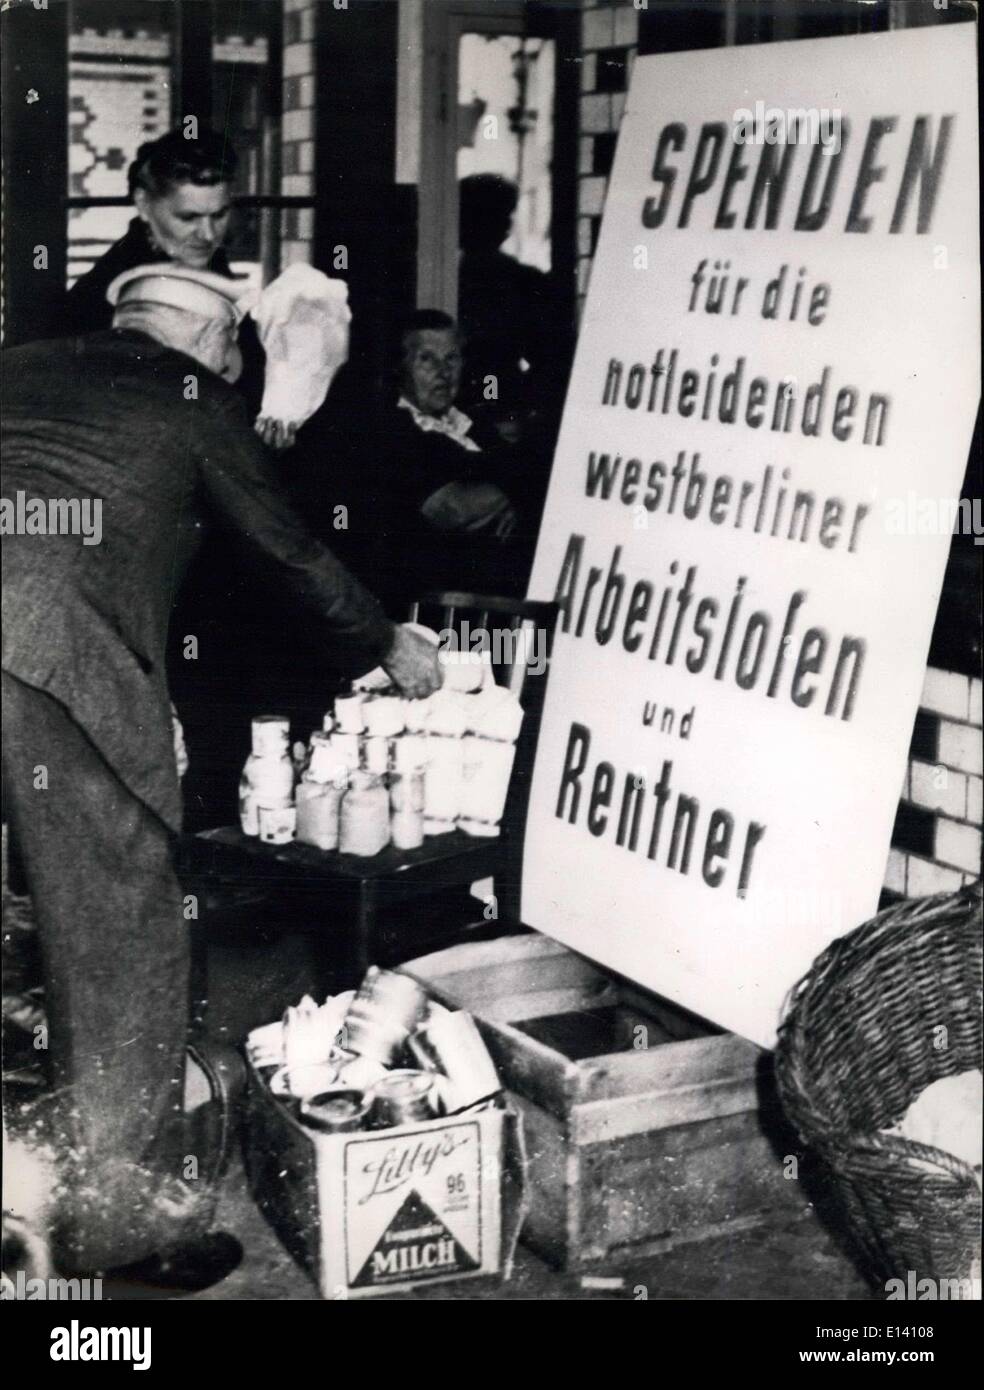 Mar. 31, 2012 - A deeply moving picture!.: The inhabitants of the East-secctor of Berlin and of the Soviet zone are forced on some stations of Berlin to deliver the food-stuffs they have got in Western Berlin. And the propaganda-poster informs that the delivered rations will be distributed to West-Berlin jobles persons, The seized food-stuffs are piled up high in the collection points. Our picture was taken on Potsdam Station shows an inhabitant of the Soviet zone who has just to lay down hi cans and food-stuffs before the propaganda-poster. Notice the disappointed face of the wife behind him Stock Photo